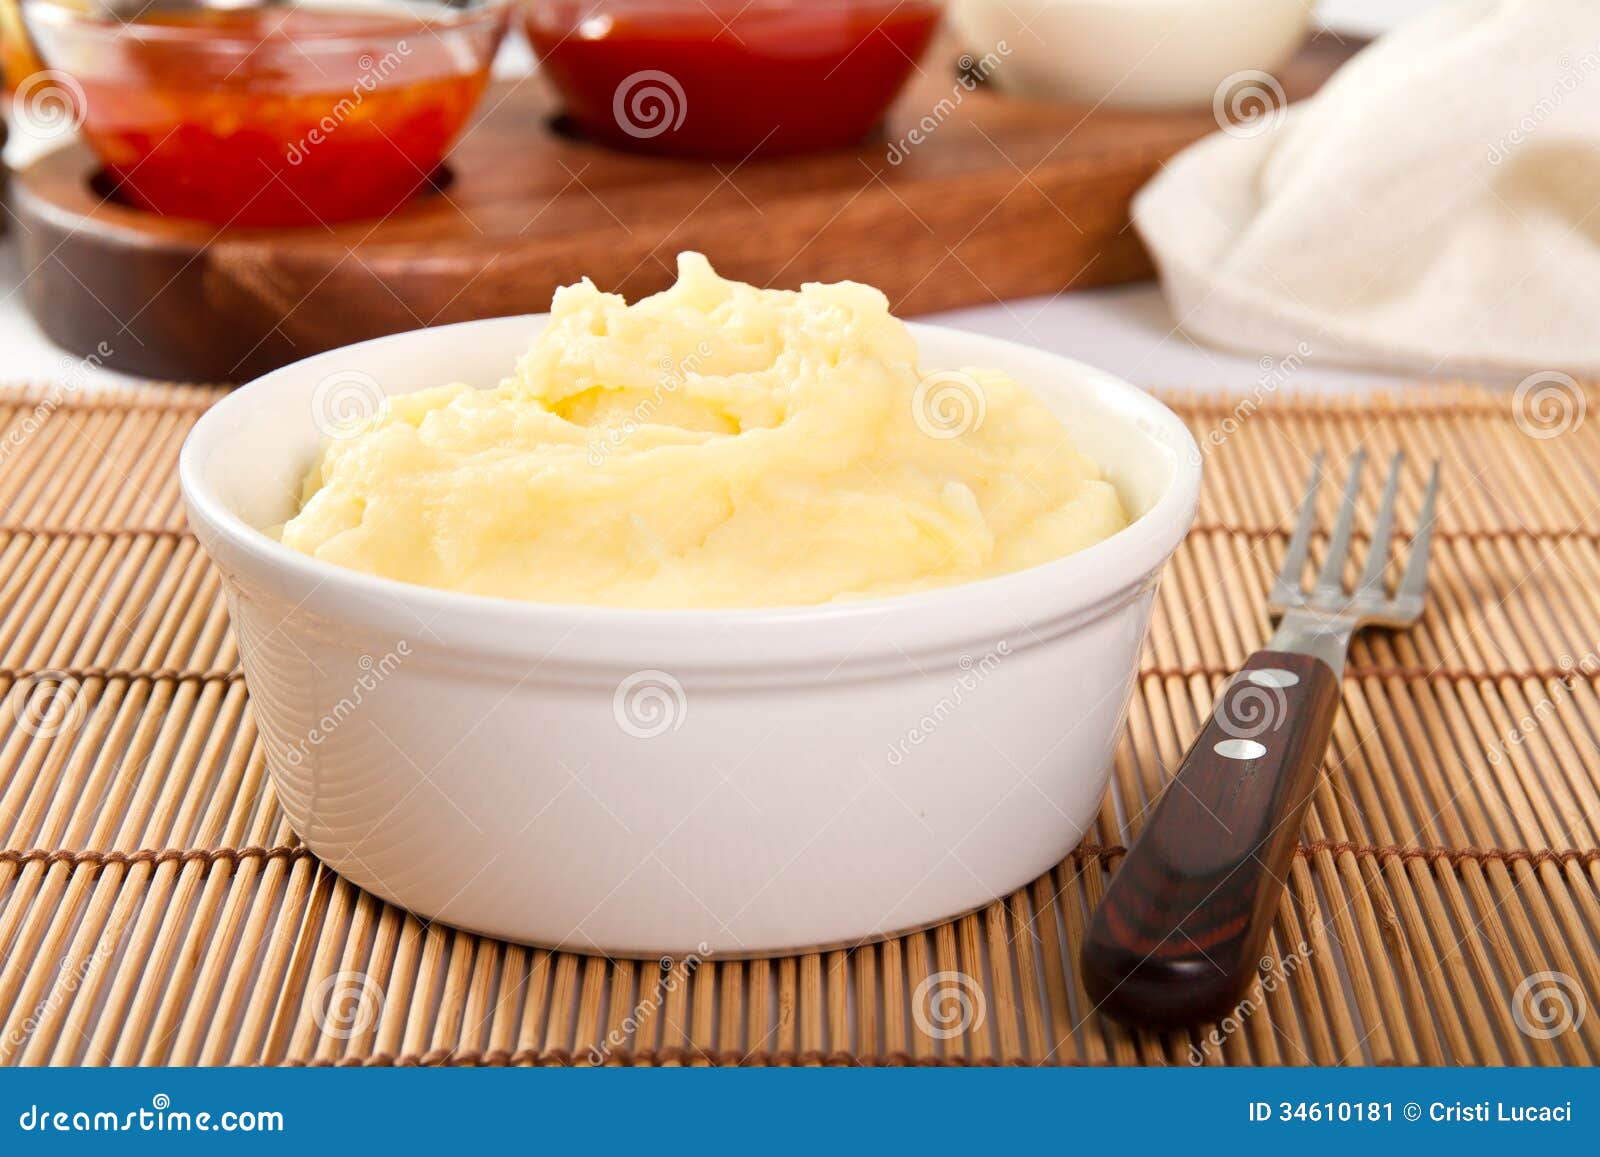 Can i steam potatoes for mashed potatoes фото 113